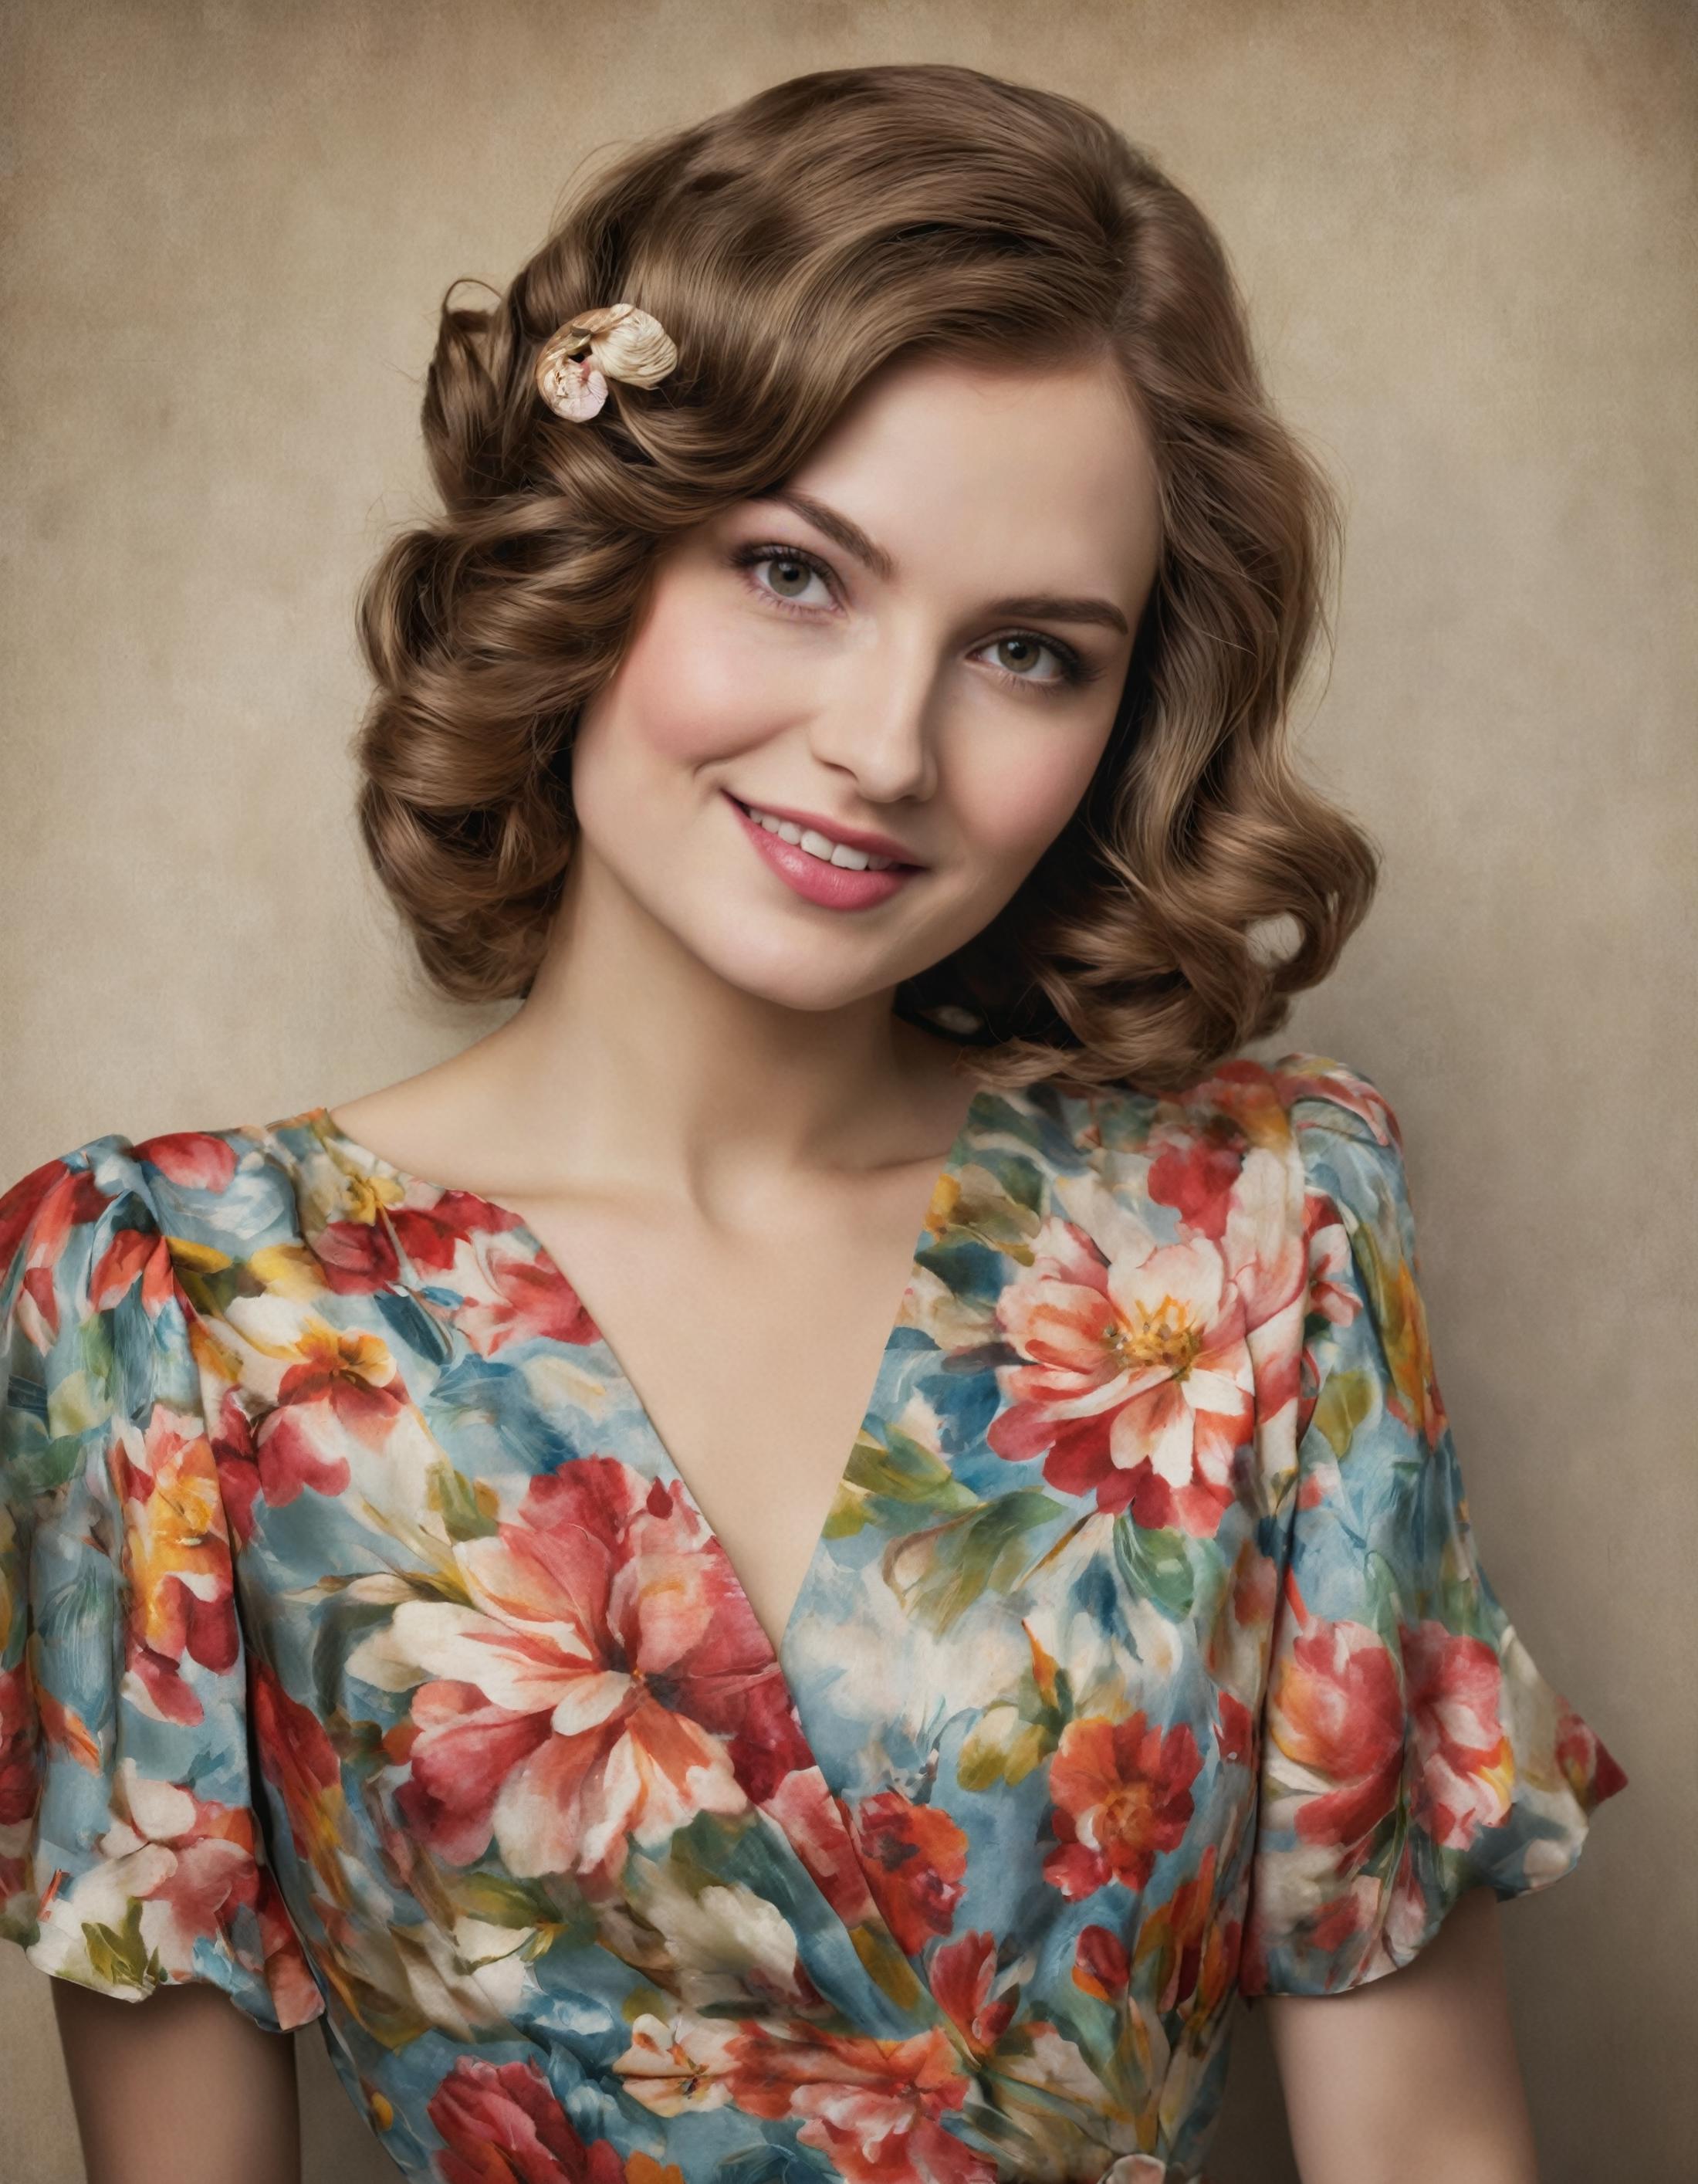 A smiling woman wearing a floral dress and a pearl in her hair.